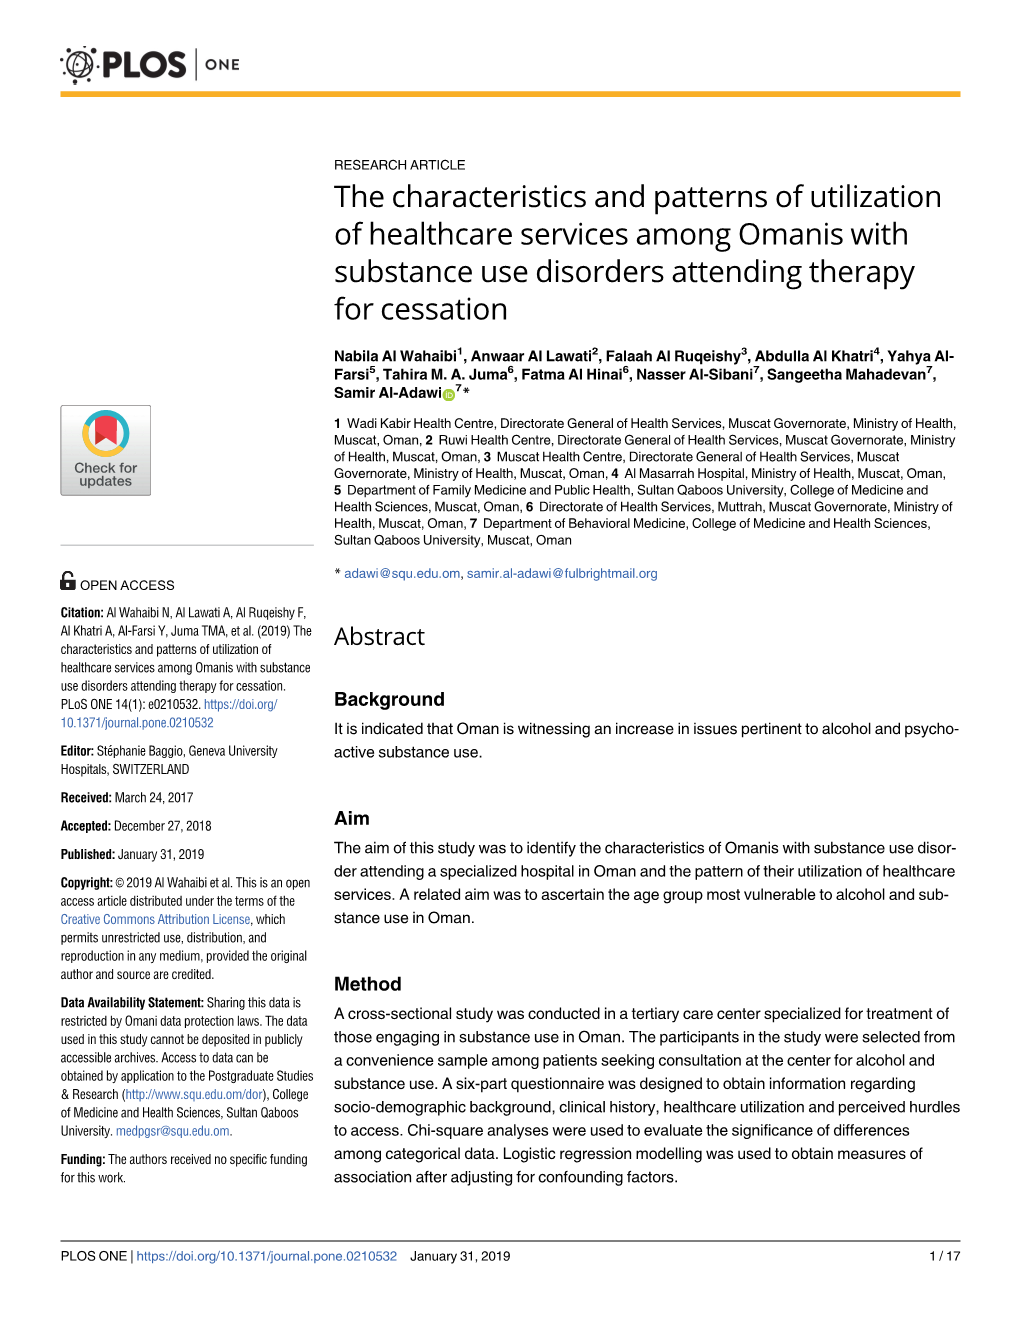 The Characteristics and Patterns of Utilization of Healthcare Services Among Omanis with Substance Use Disorders Attending Therapy for Cessation